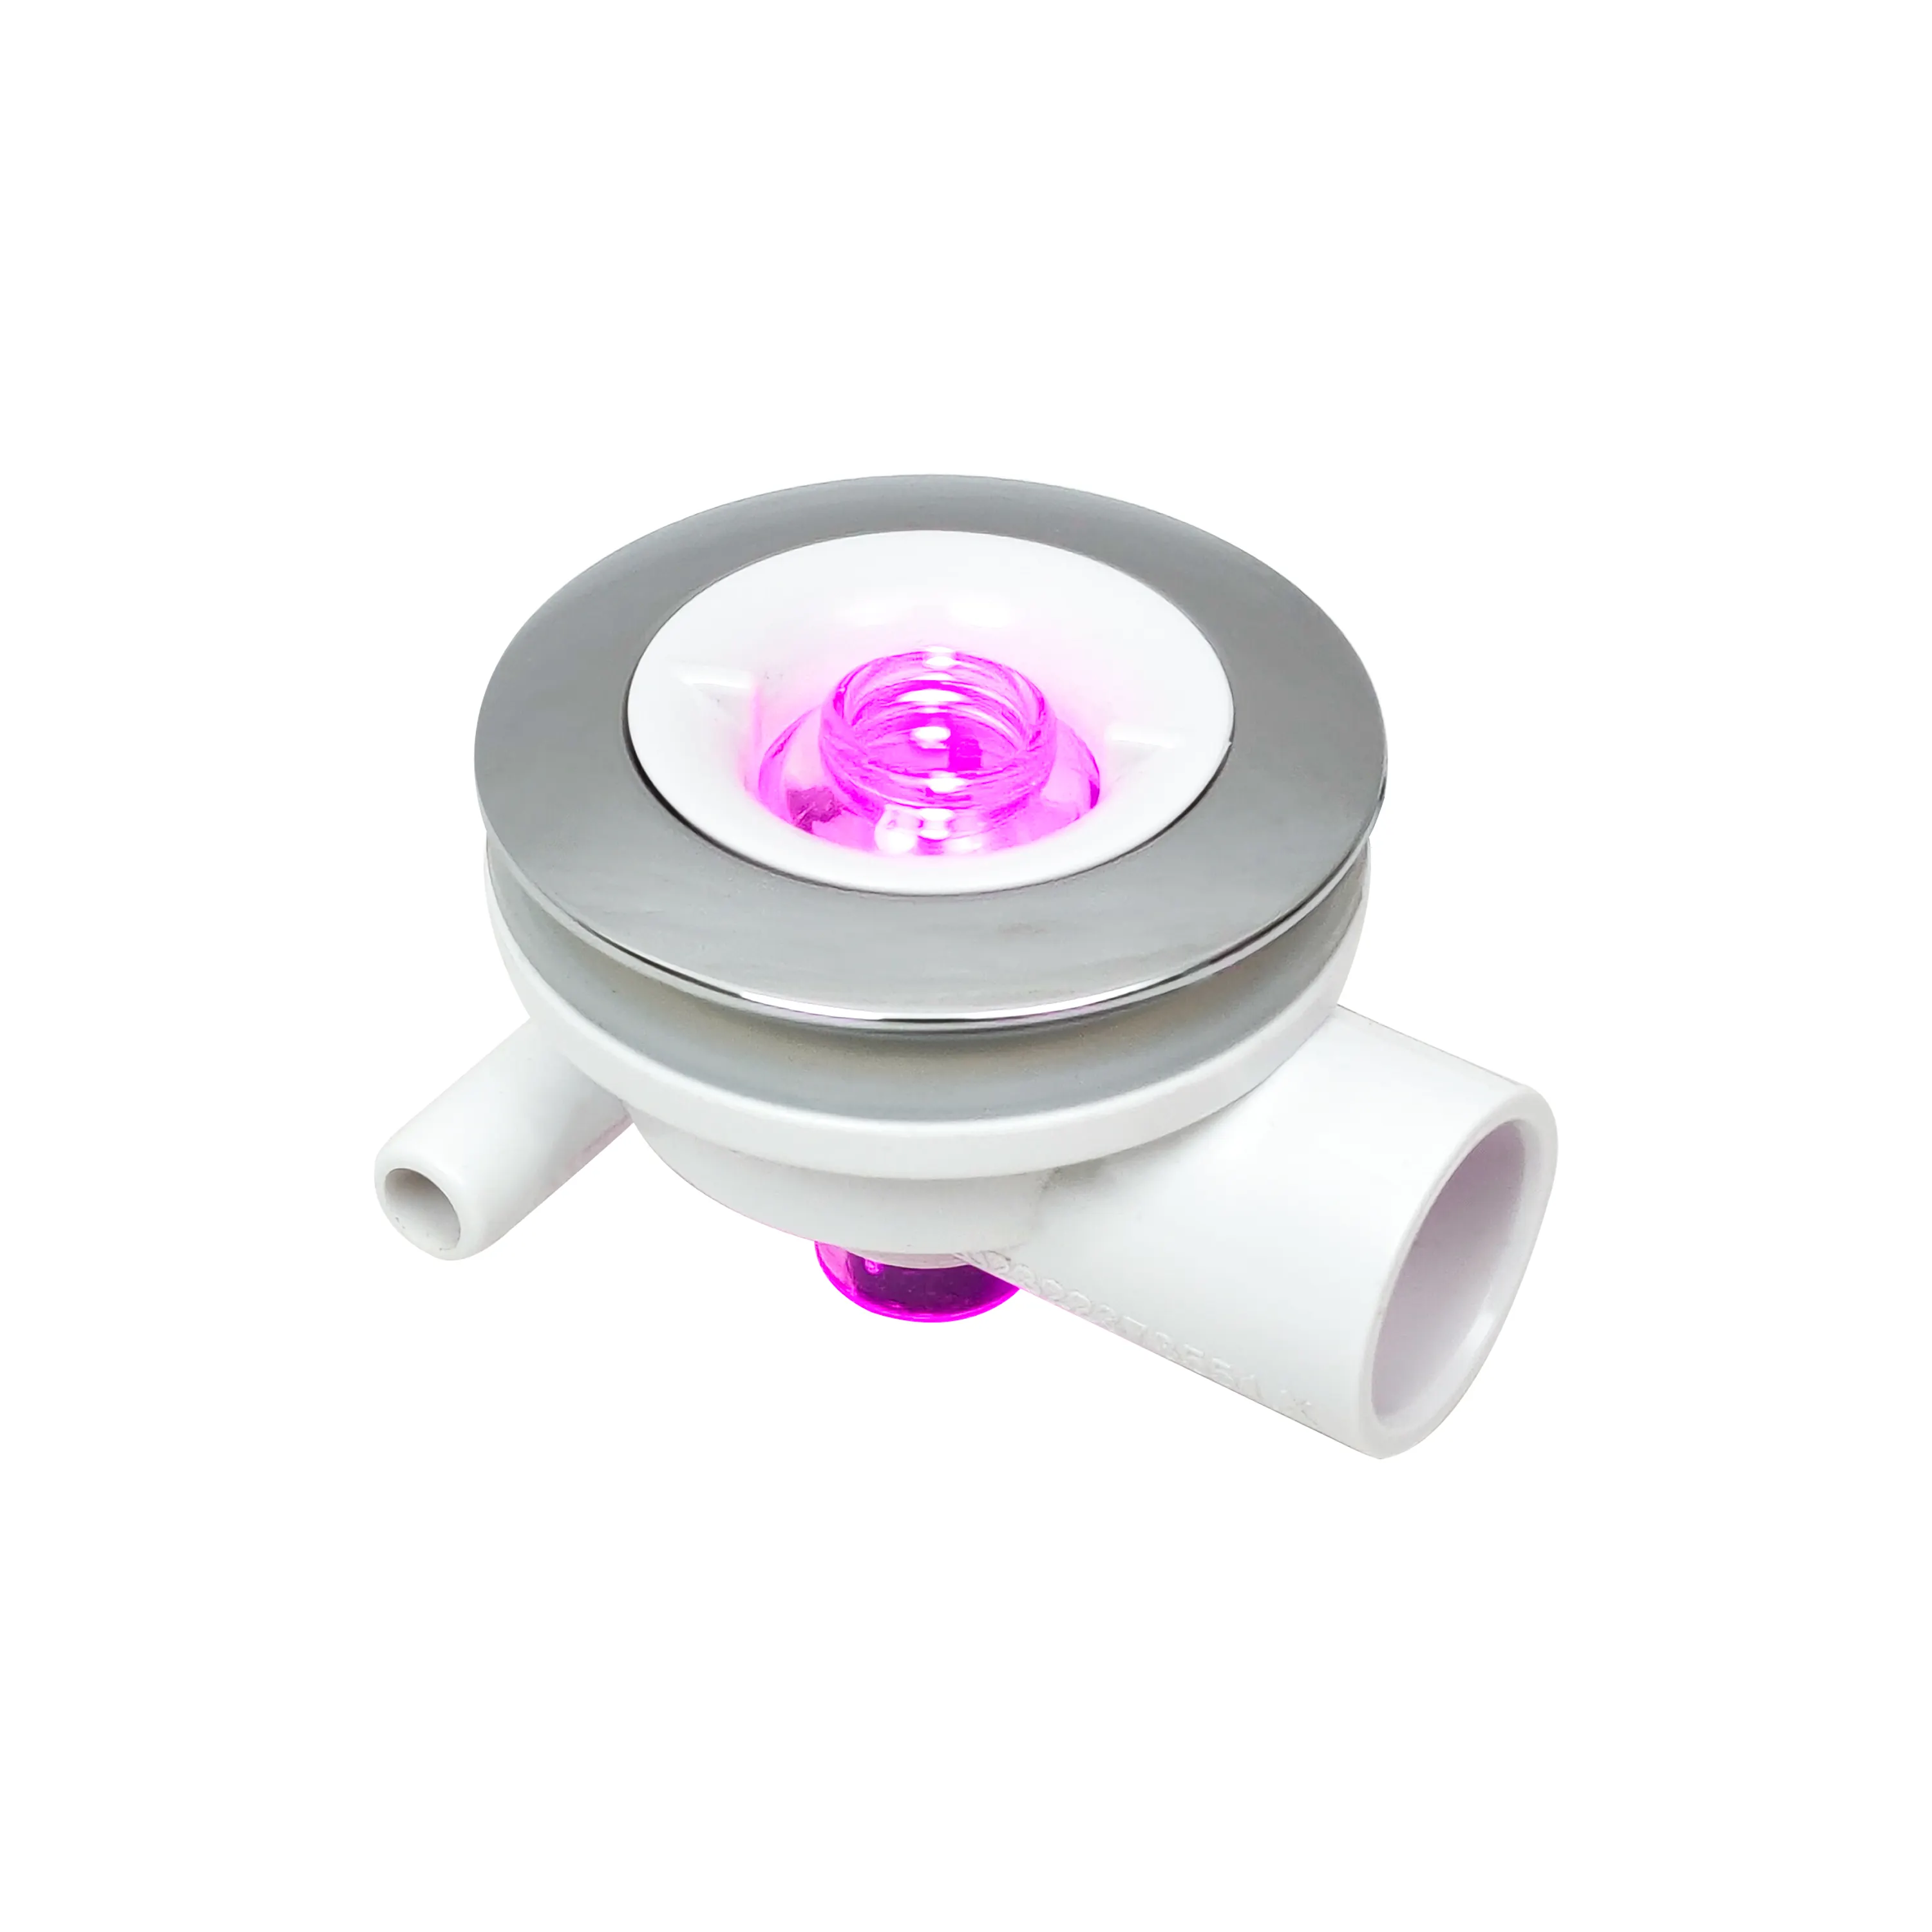 Ultra-thin cover spa tub white massage shower bathtub Air Massage Jet with LED Waterproof Lights